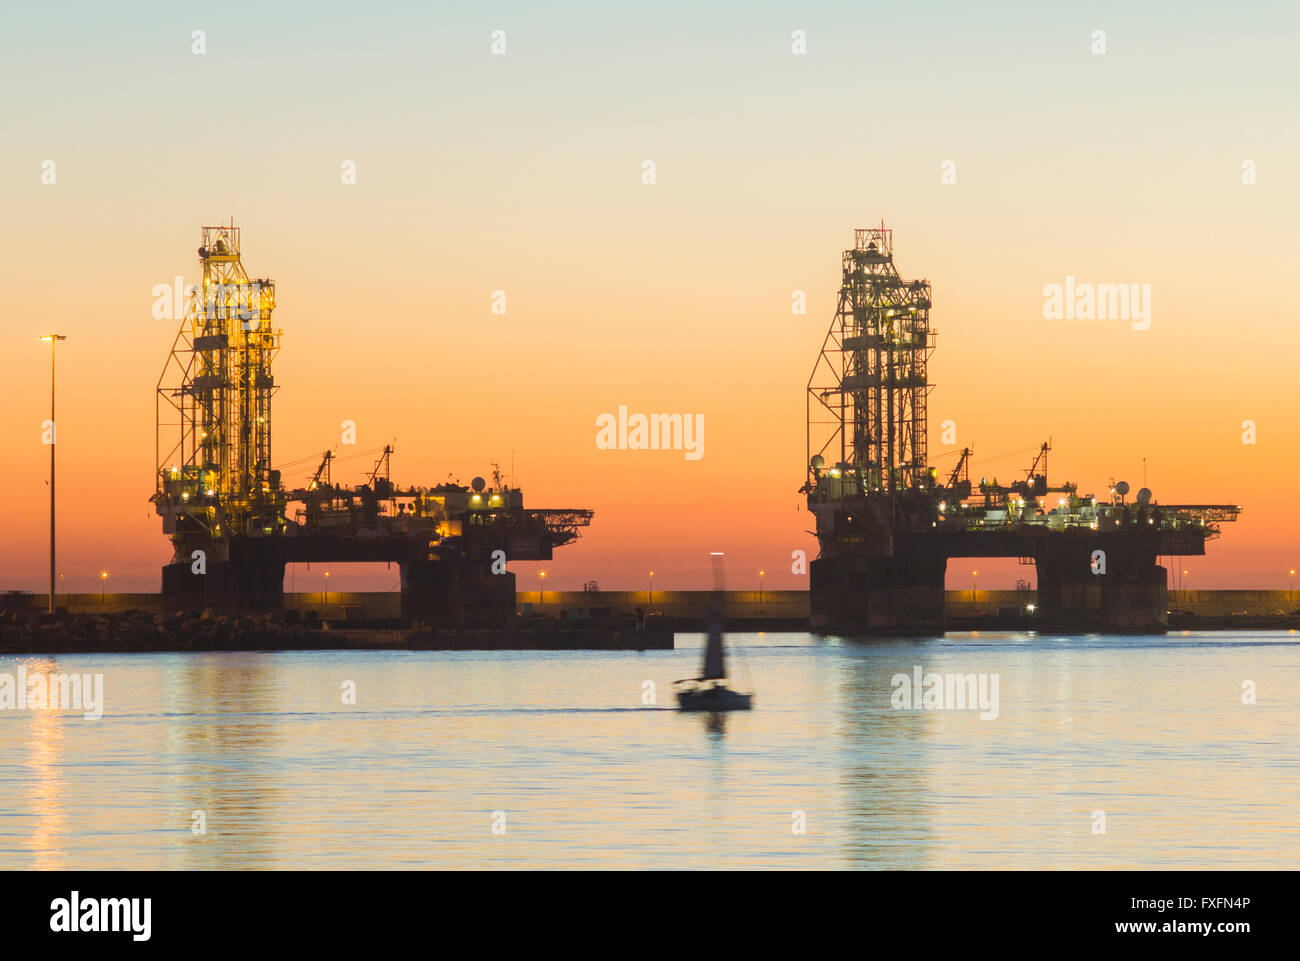 Las Palmas, Gran Canaria, Canary Islands, Spain, 15th April 2016. Weather: A yacht sails past mothballed oil rigs at sunrise in Las Palmas port on a glorious Thursday morning in Las Palmas, the capital of Gran Canaria. PICTURED: Las Palmas port is used by a number of oil companies for repairs, resupplying, and in the the case of some of the rigs/platforms in these images, for mothballing rigs for long periods due to the fall in oil prices and over supply of crude oil. Credit:  Alan Dawson News/Alamy Live News Stock Photo